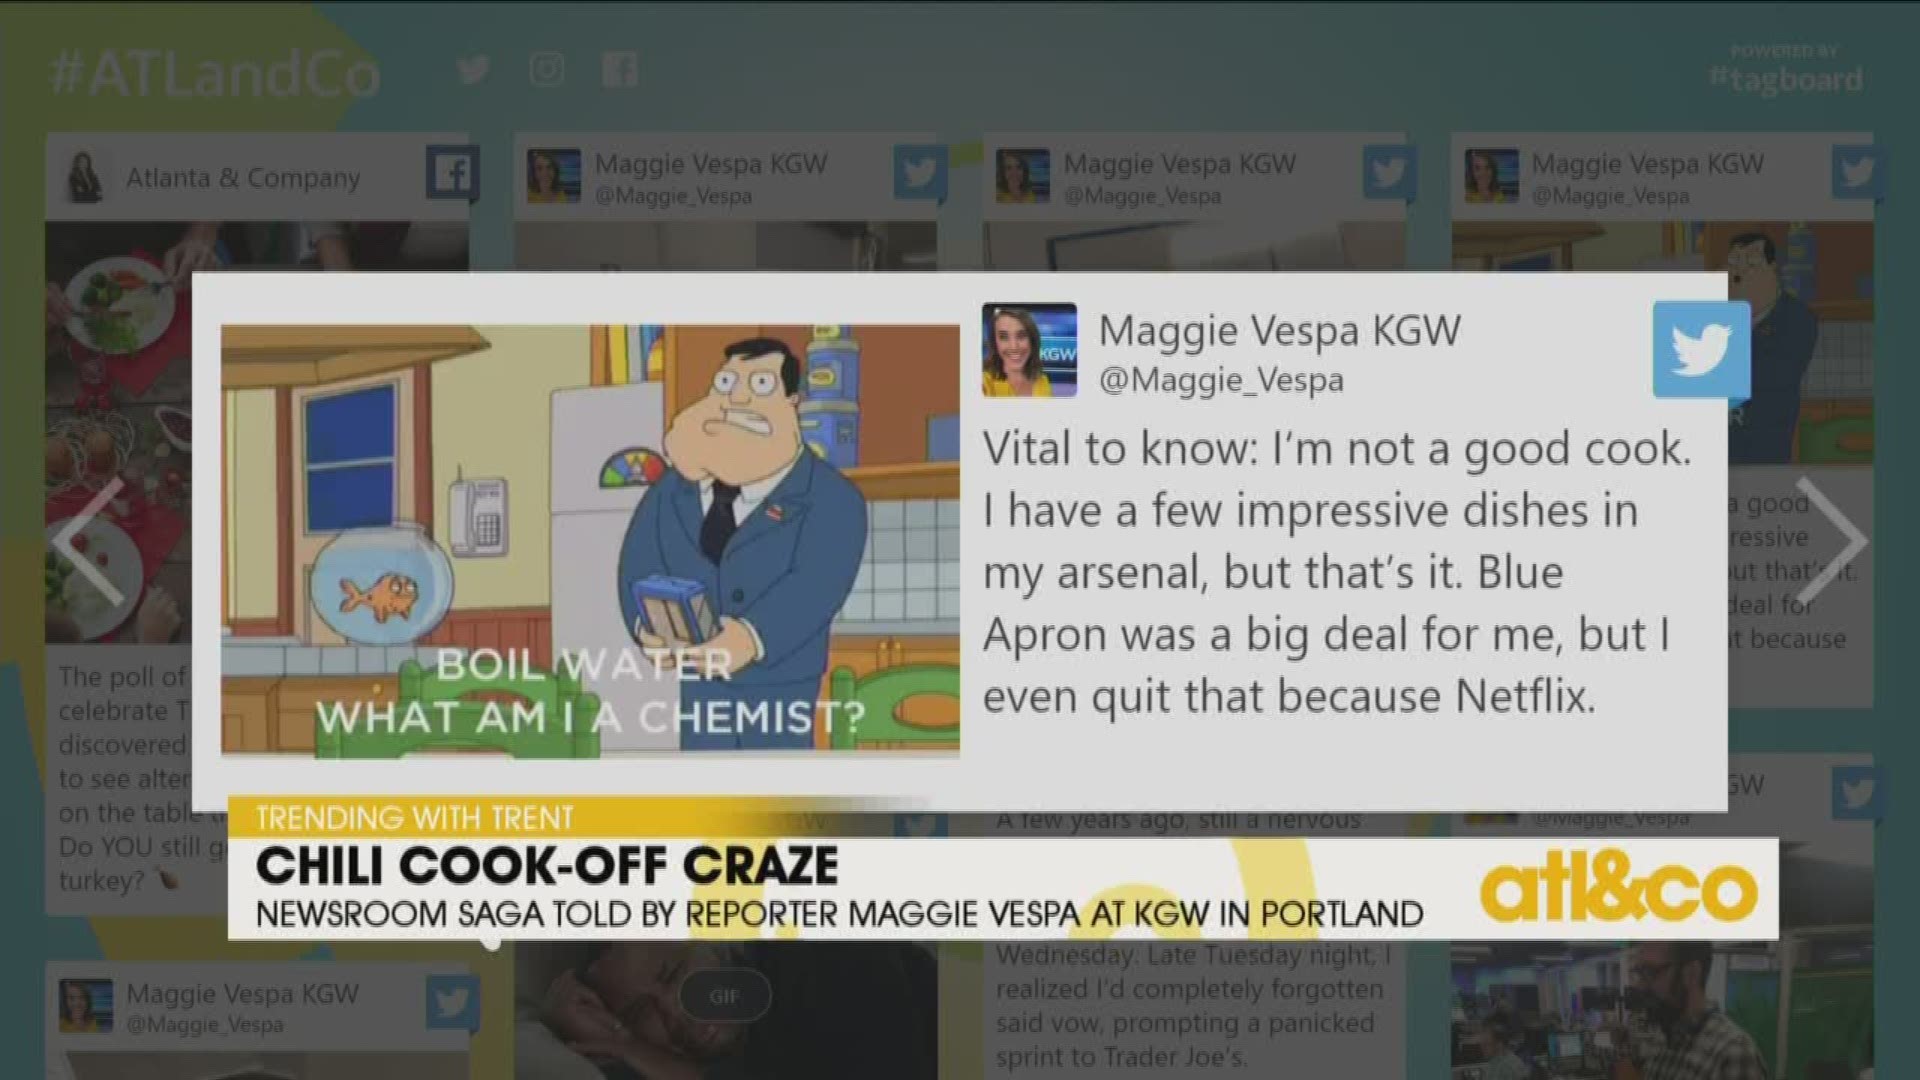 Trending with Trent shares a newsroom chili cook-off saga, as lived and tweeted by KGW reporter Maggie Vespa.